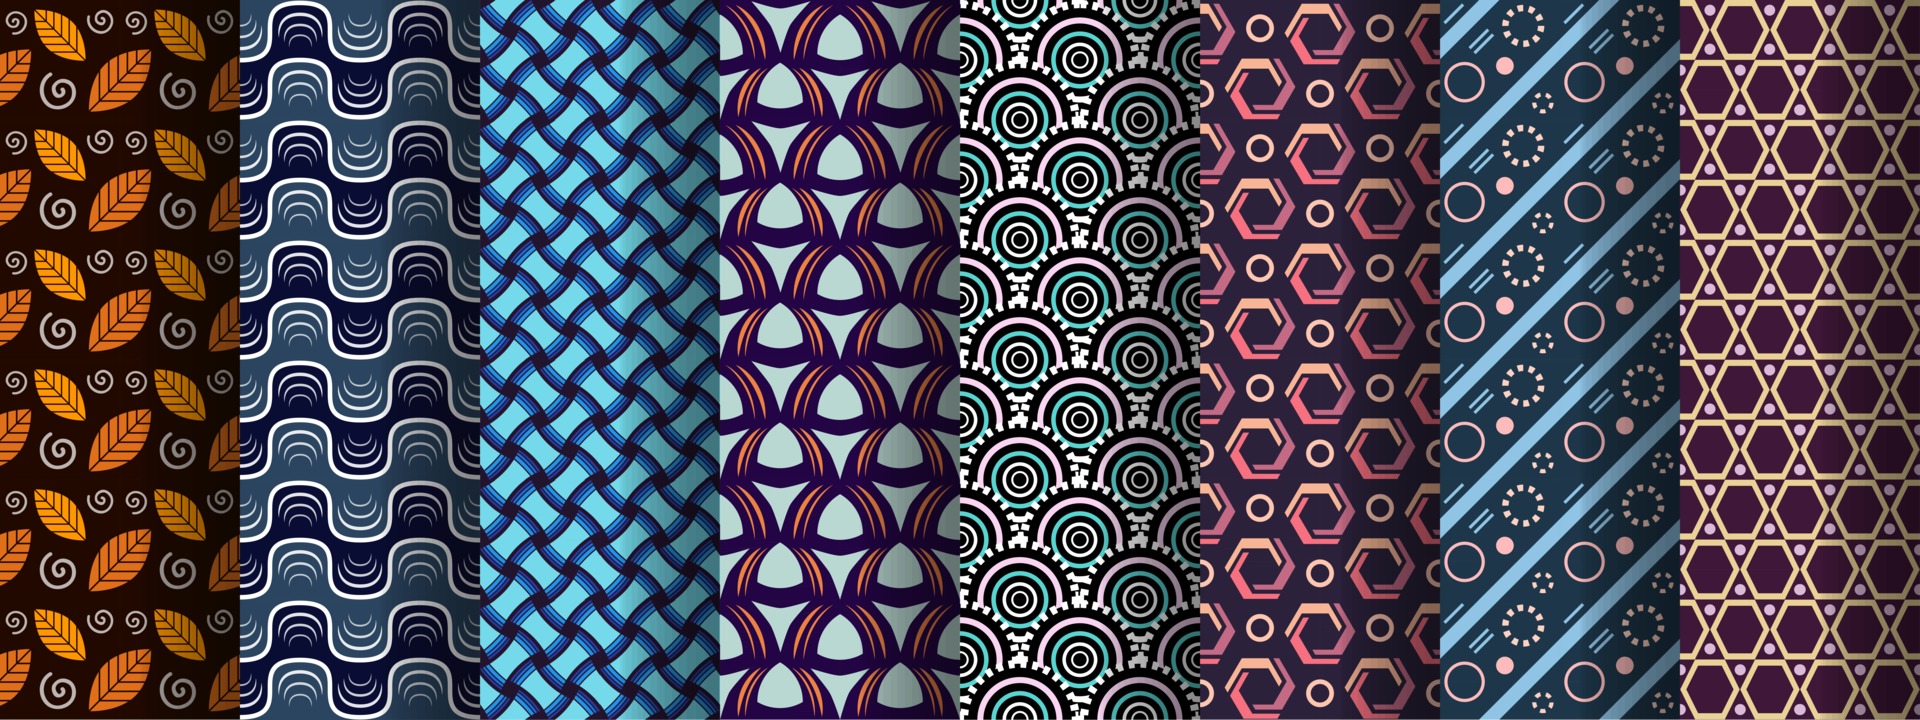 Vector colorful seamless pattern set, collection of repeating geometric element patterns, wallpaper, background collection, leaves, hexagonal, waves circles textile